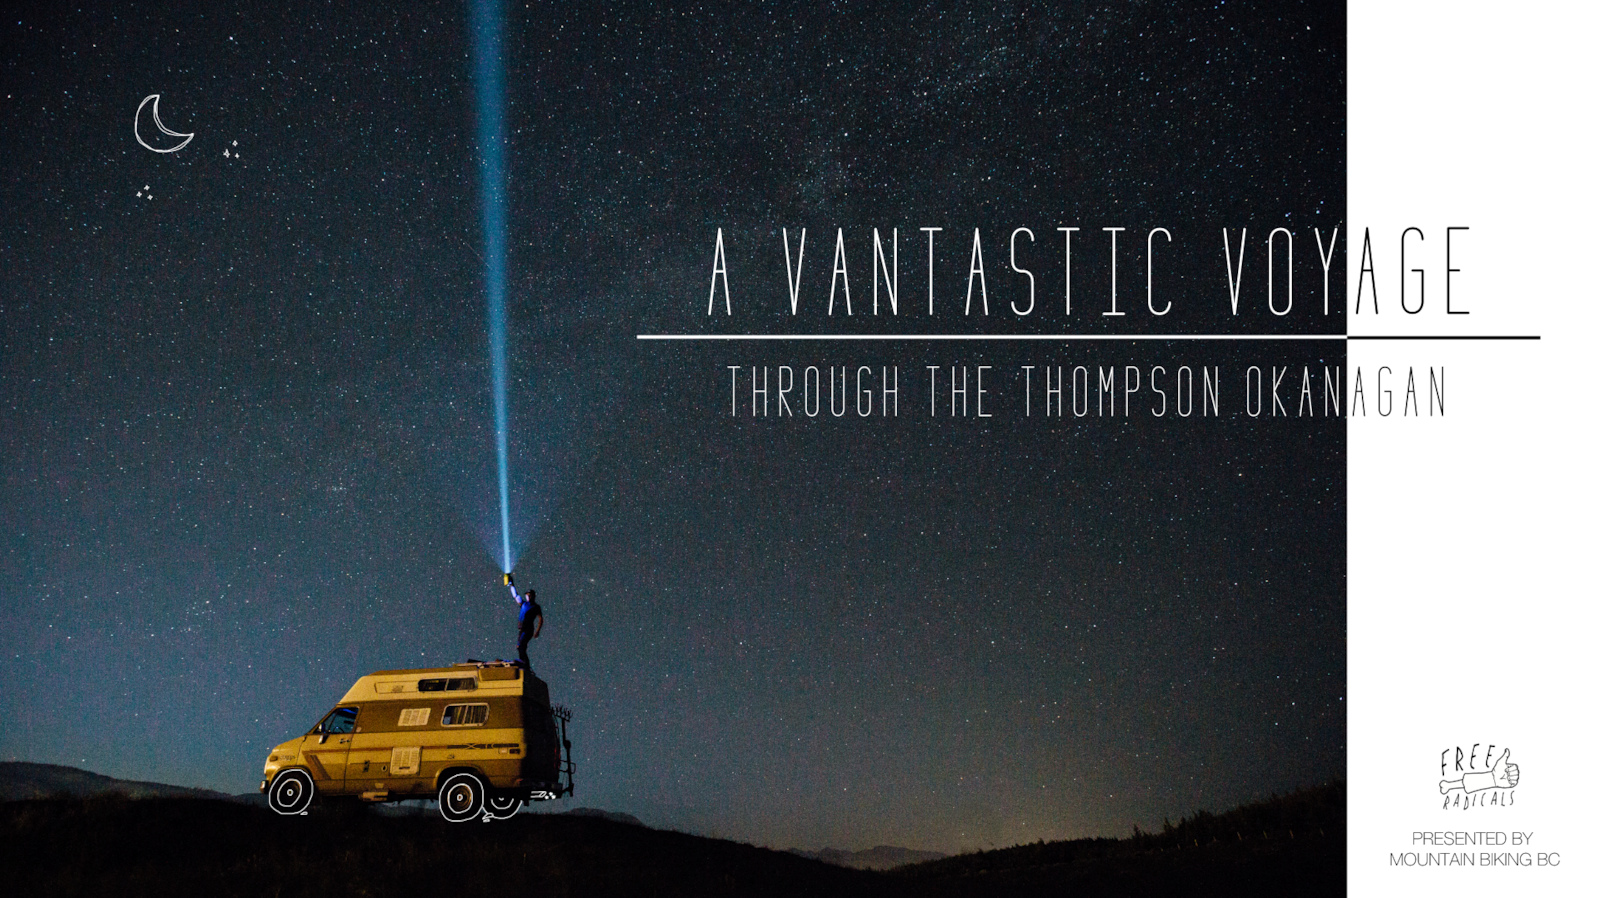 Images for A Vantastic Voyage through the Thompson-Okanagan article.